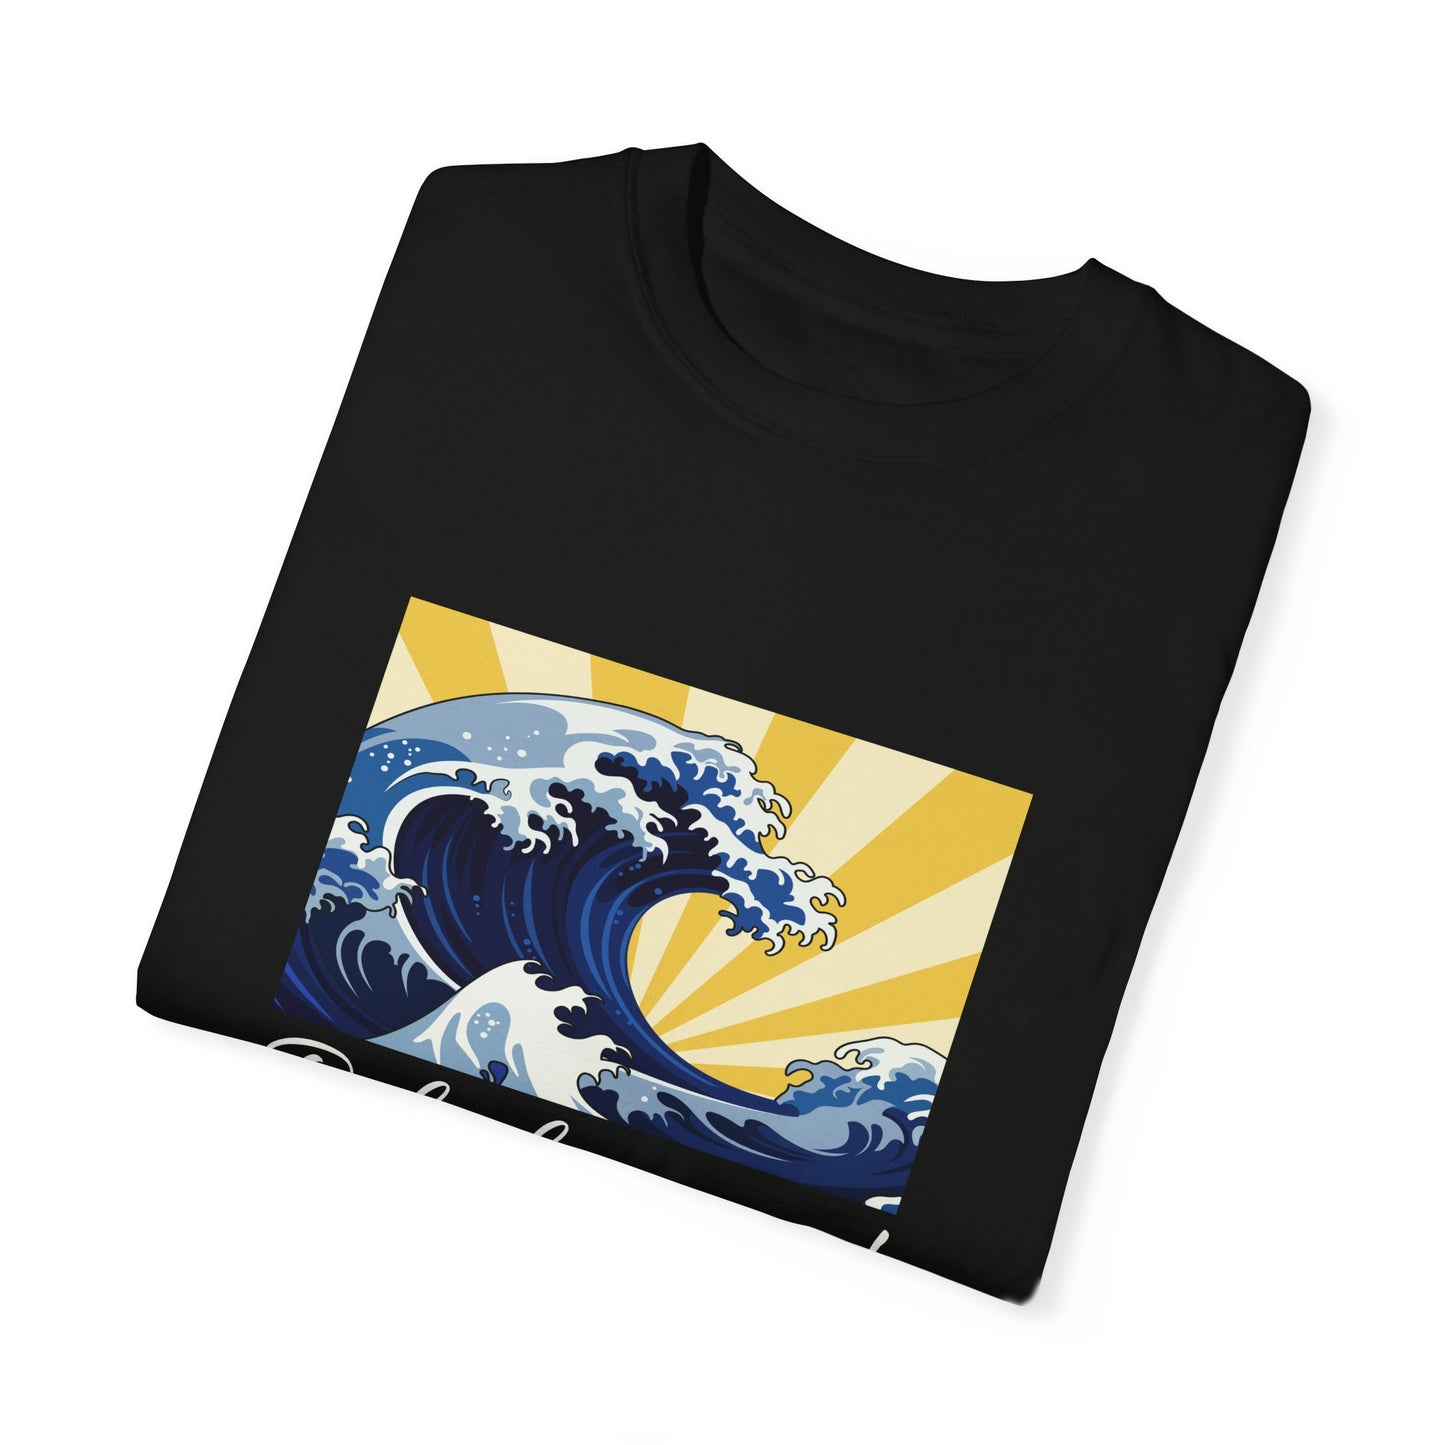 Ride the Wave Tee (Unisex Garment-Dyed T-shirt)